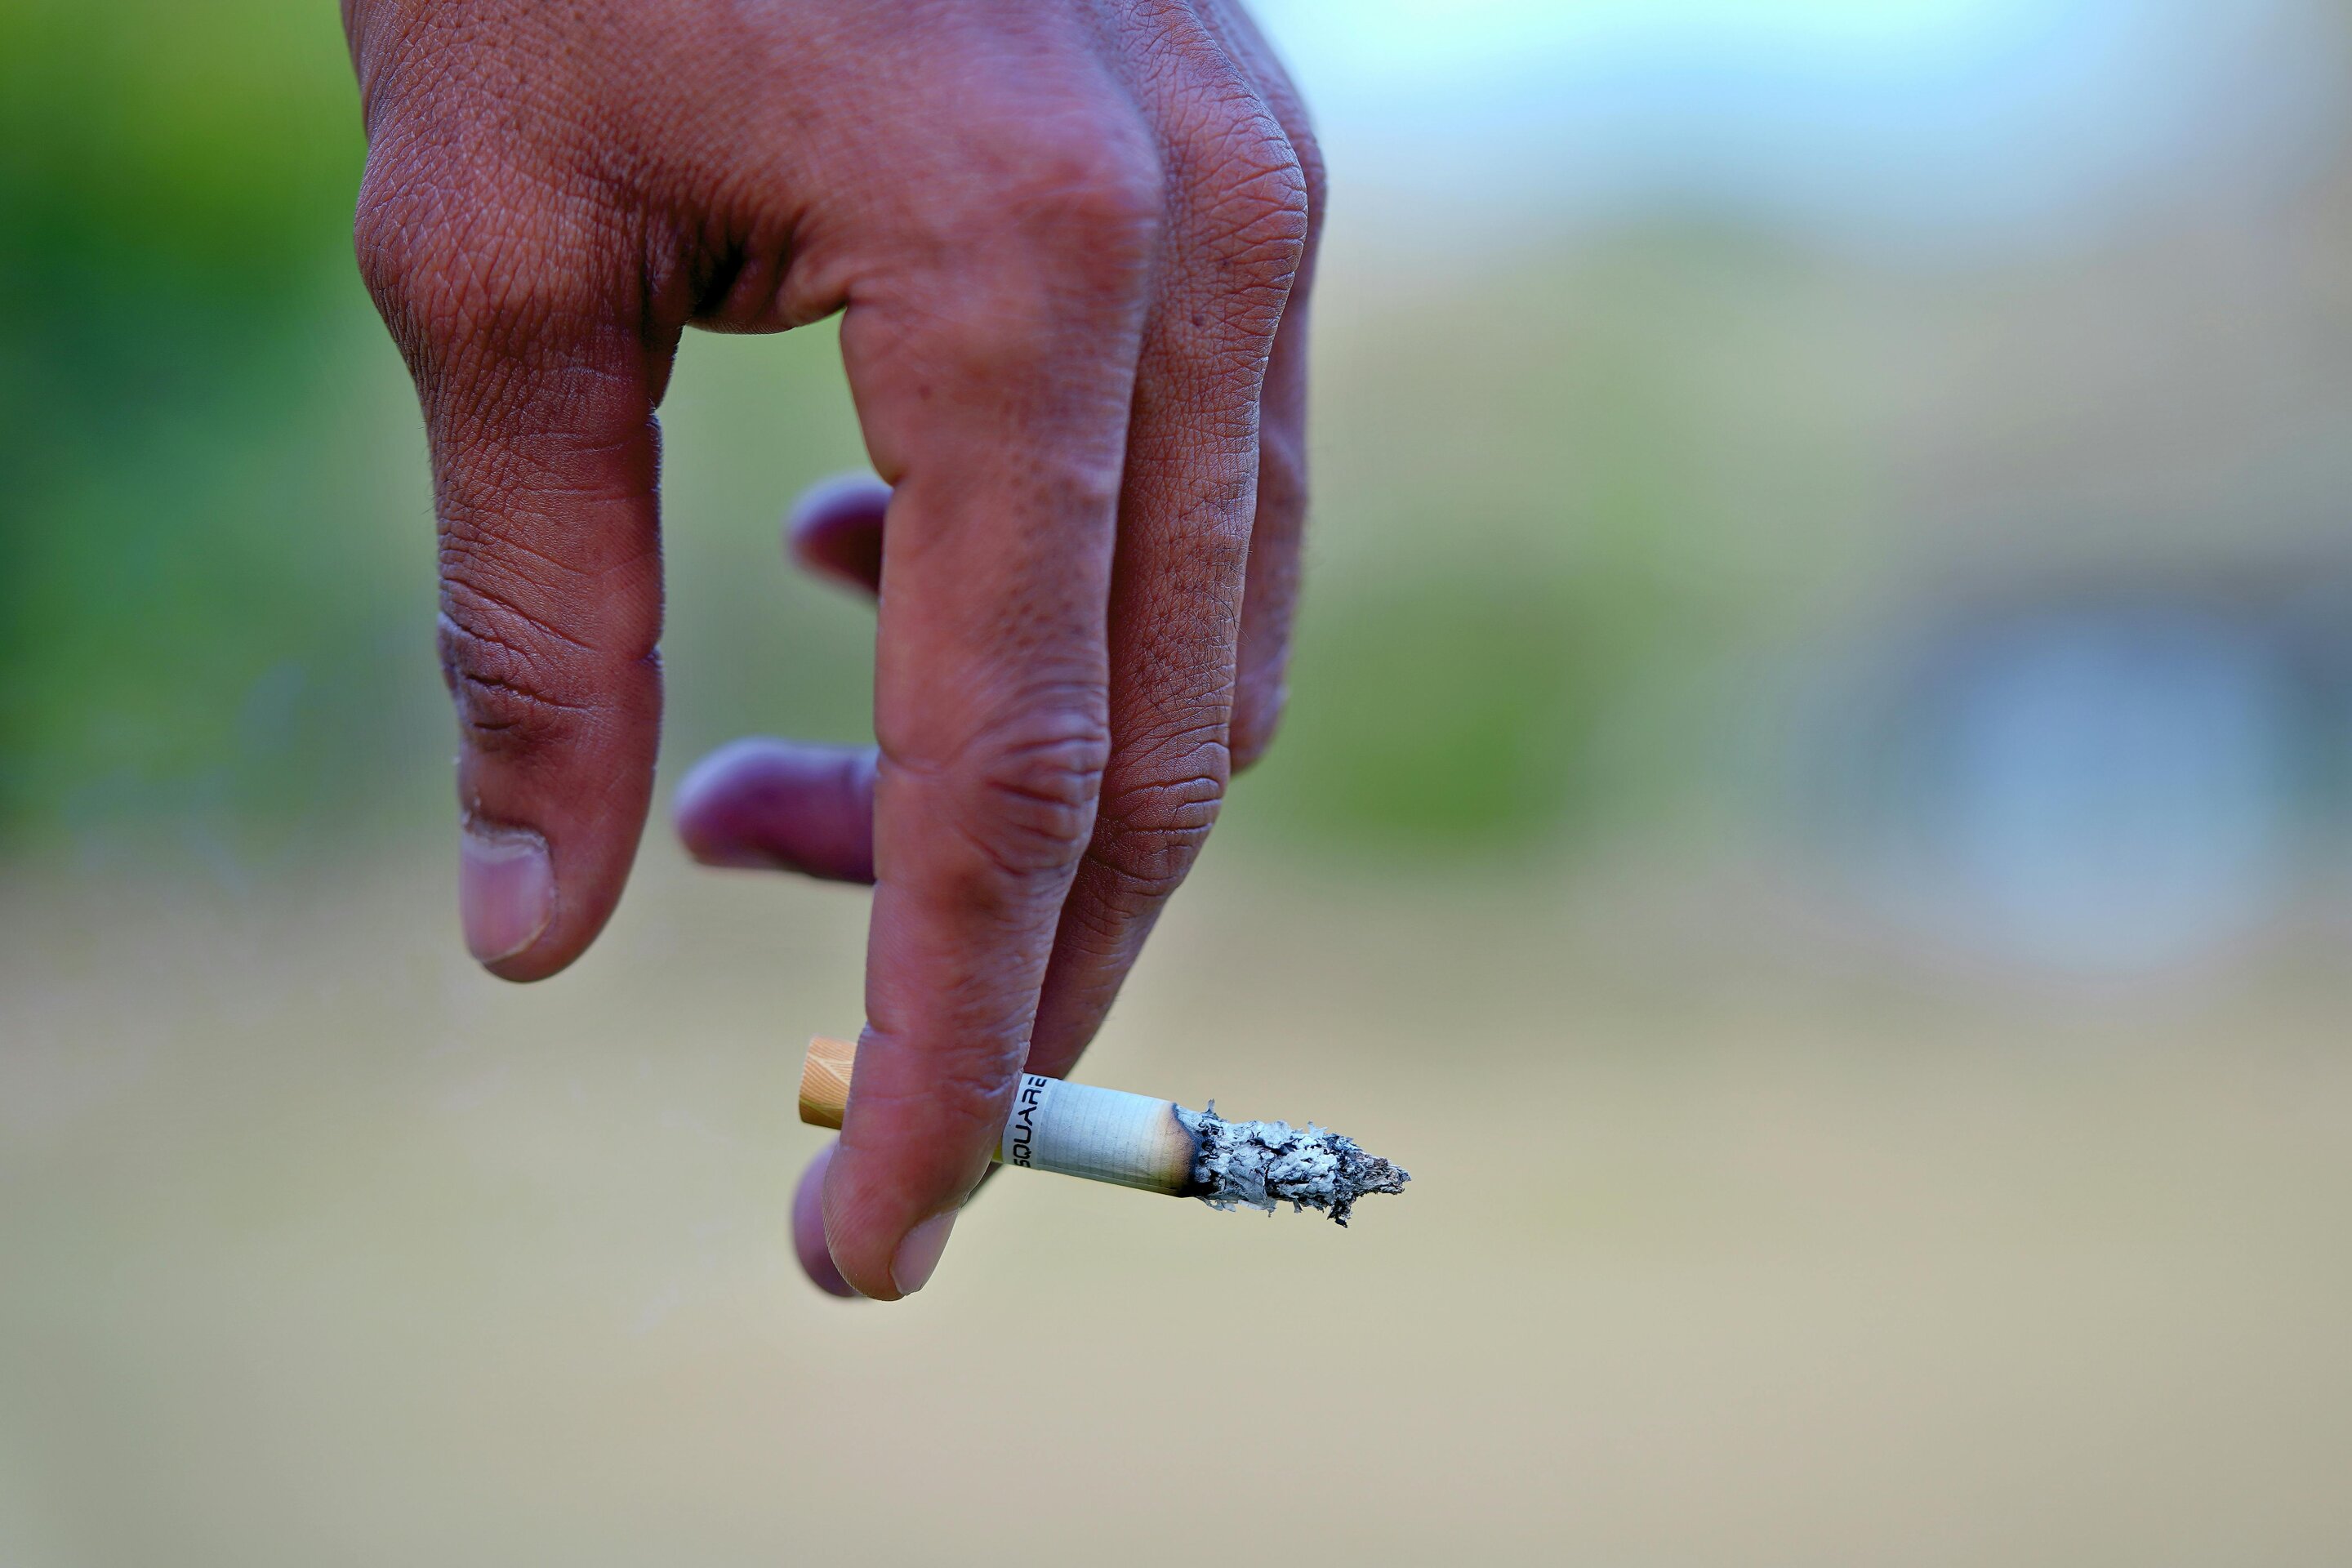 #Study finds menthol cigarette ban would lead a lot of people to quit smoking